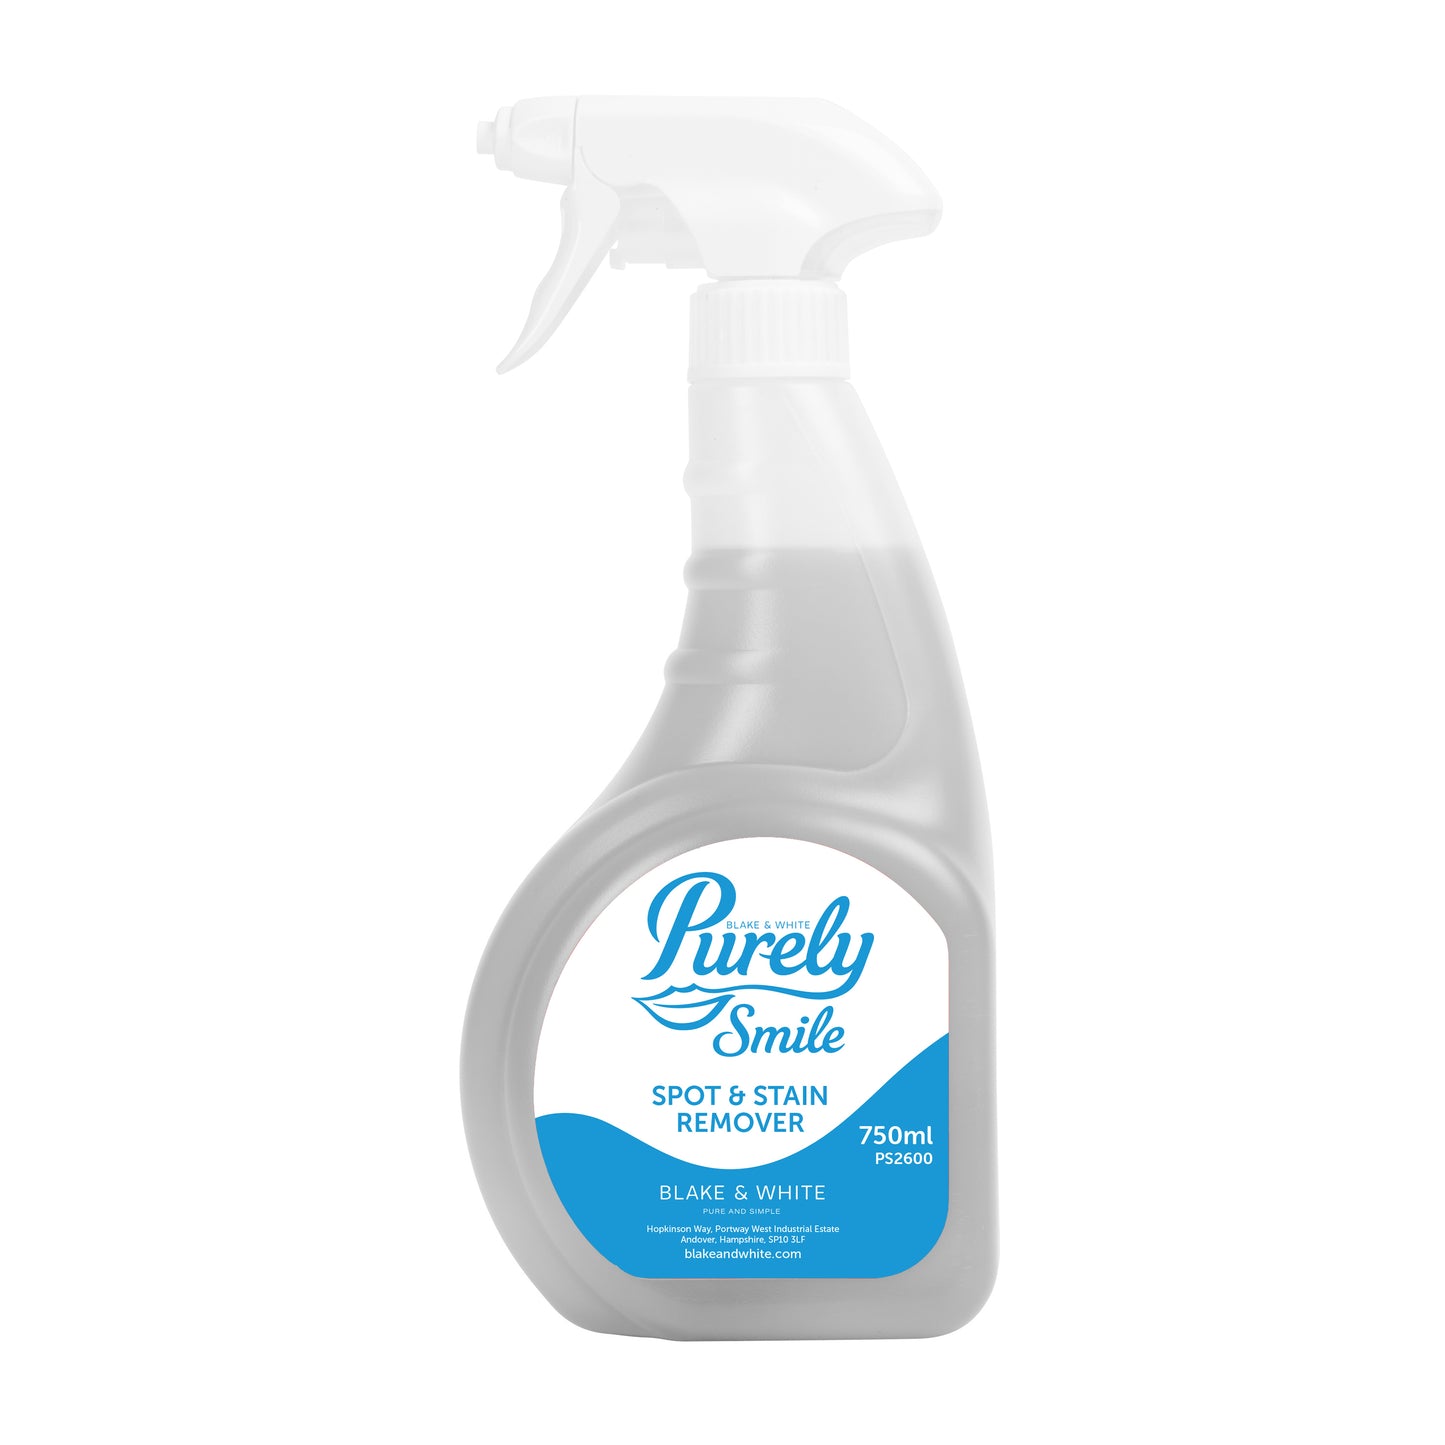 Purely Smile Spot & Stain Remover 750ml Trigger